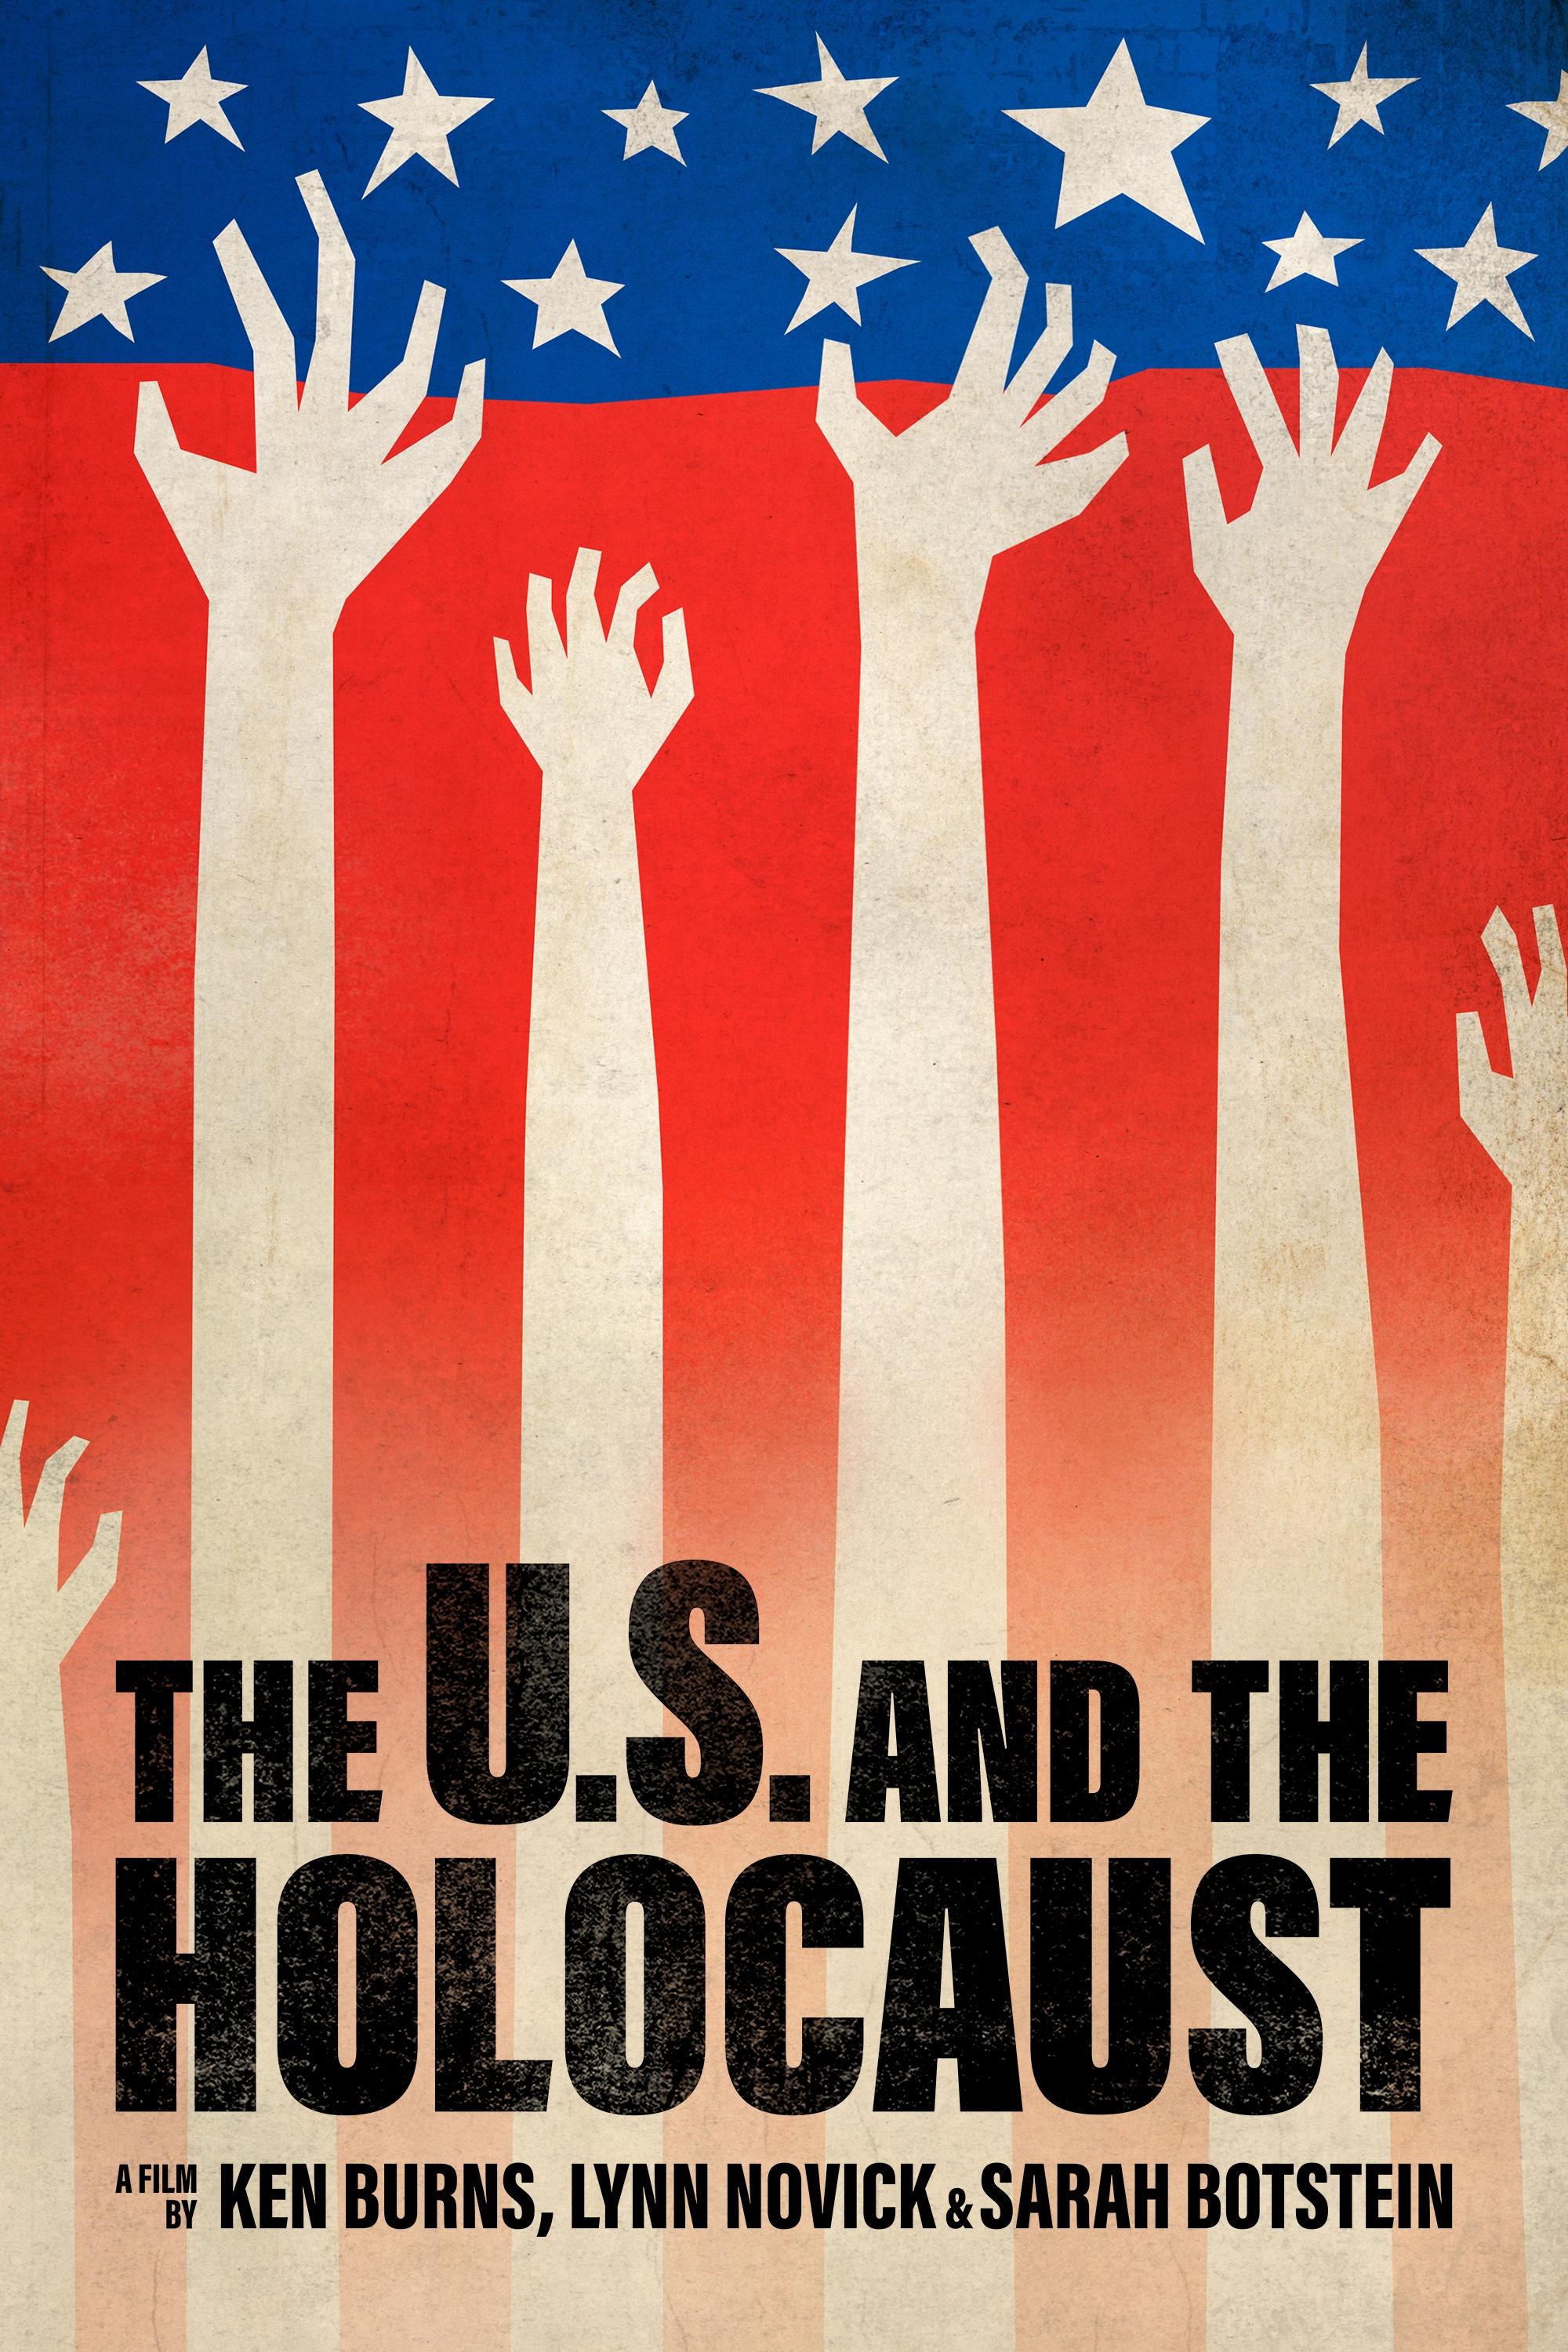 an outline of arms reaching upwards in front of a motif of the American flag. Text reads The U.S. and the Holocaust a Film by Ken Burns, Lynn Novick, and Sarah Bostein